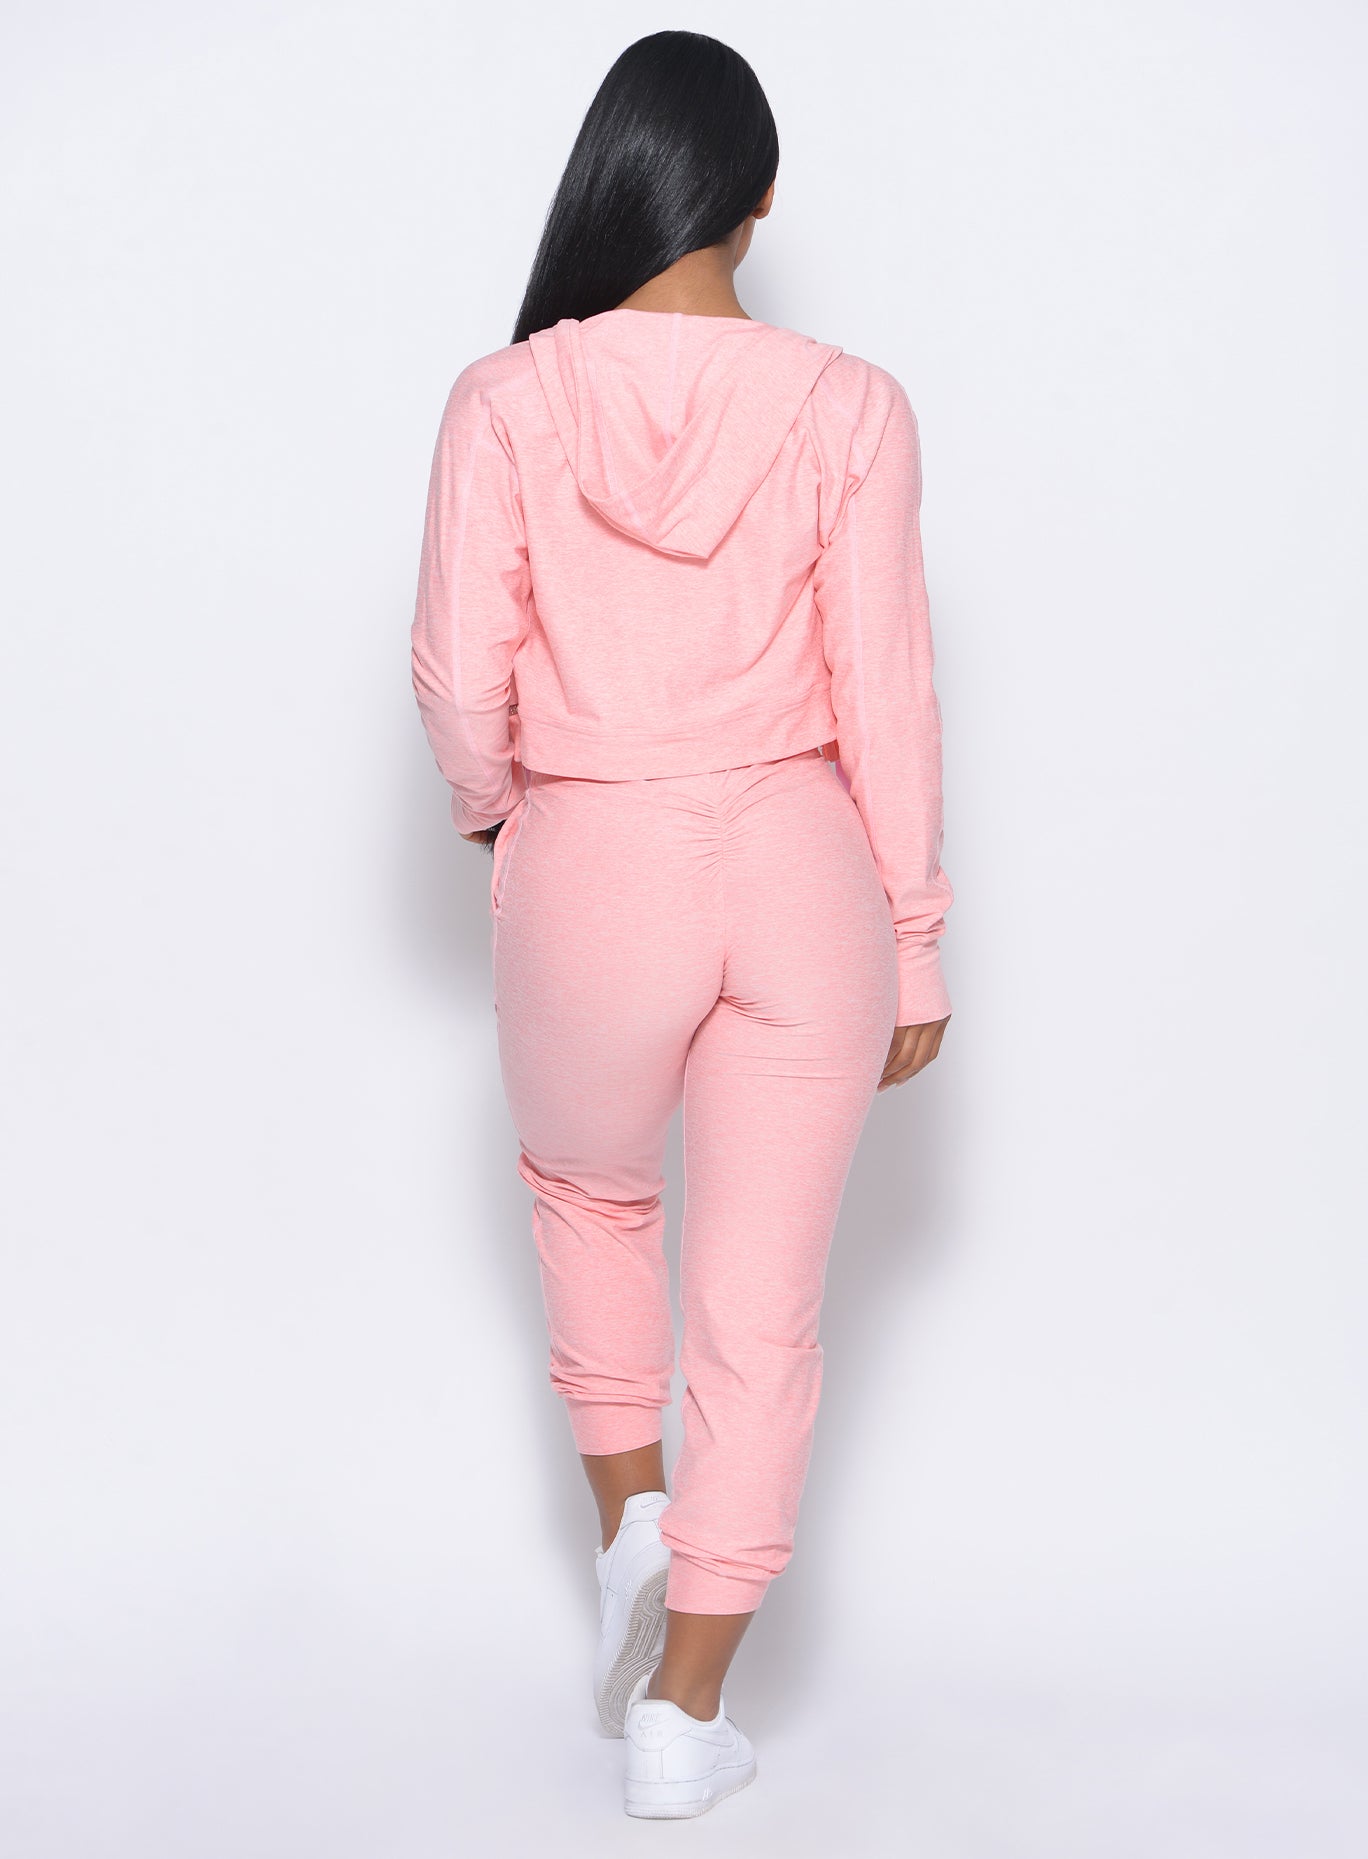 Back view of the model in our cozy joggers in peachy pink and a matching hoodie